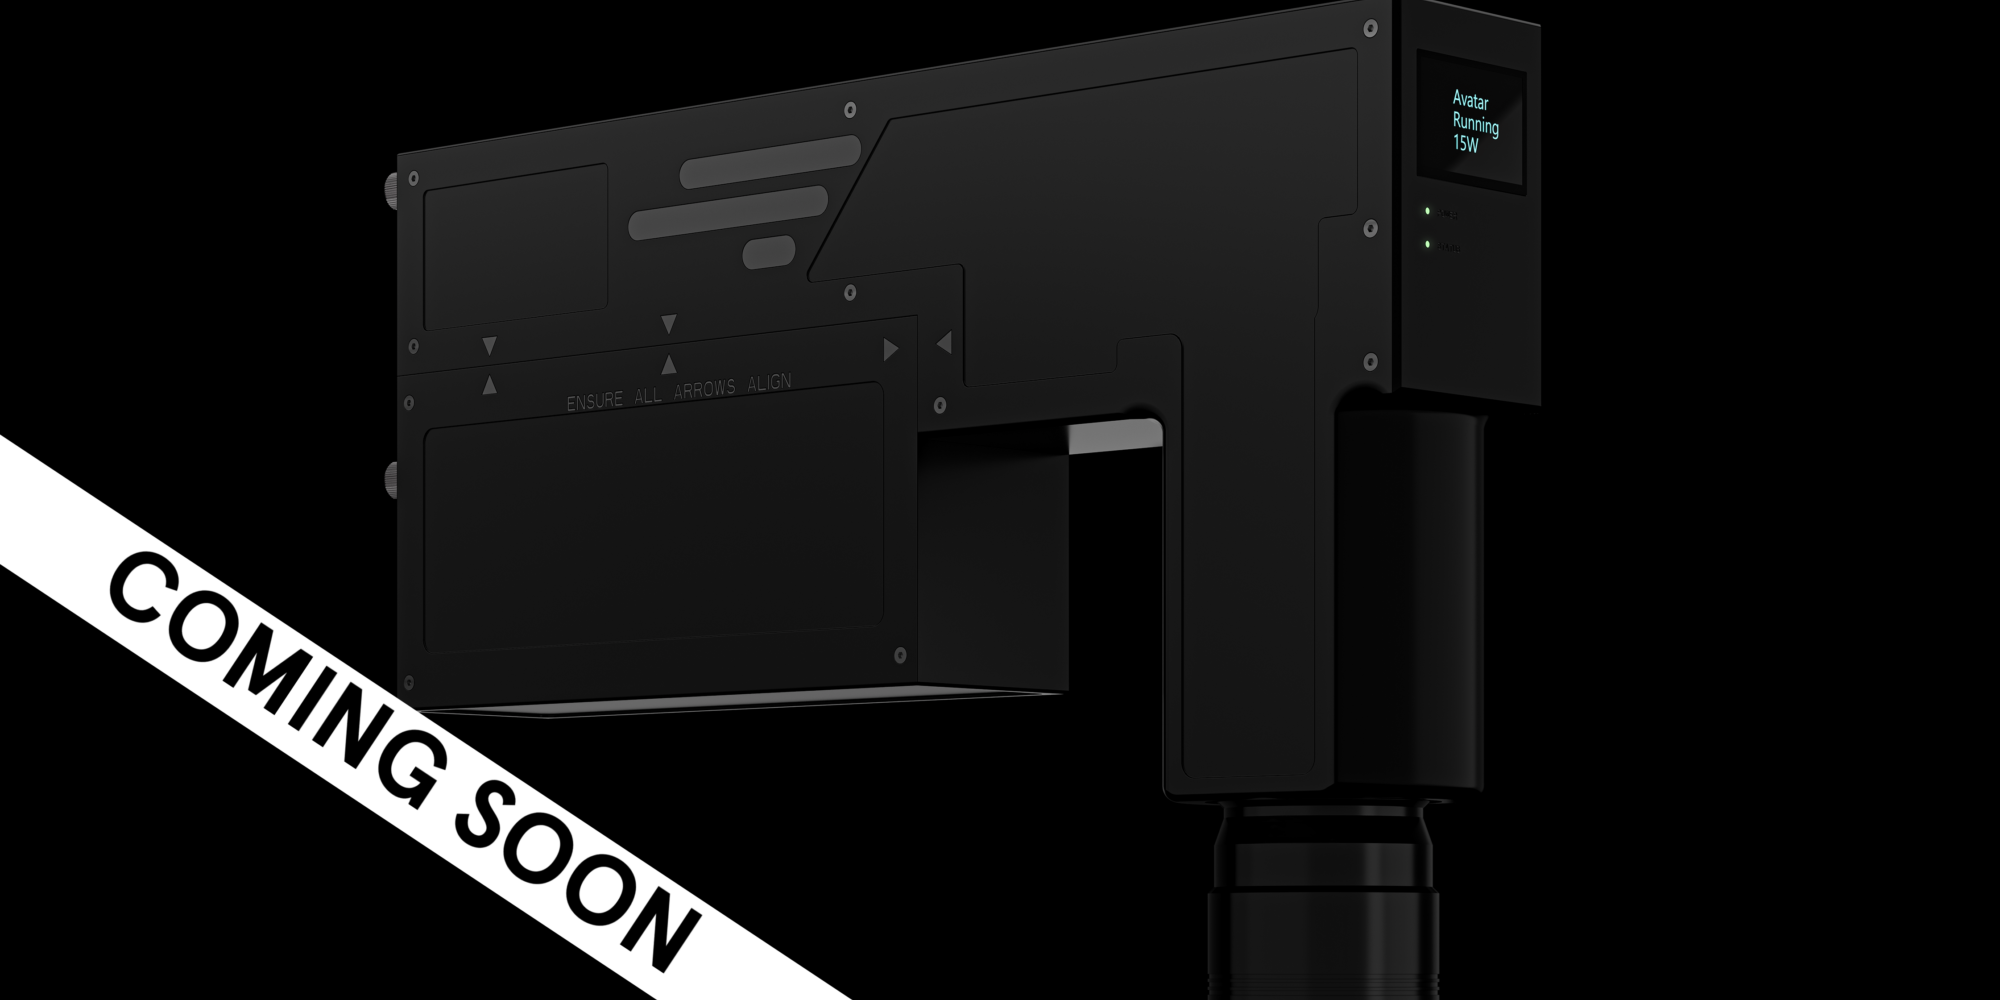 Coming soon: the first native 4K Light Projector